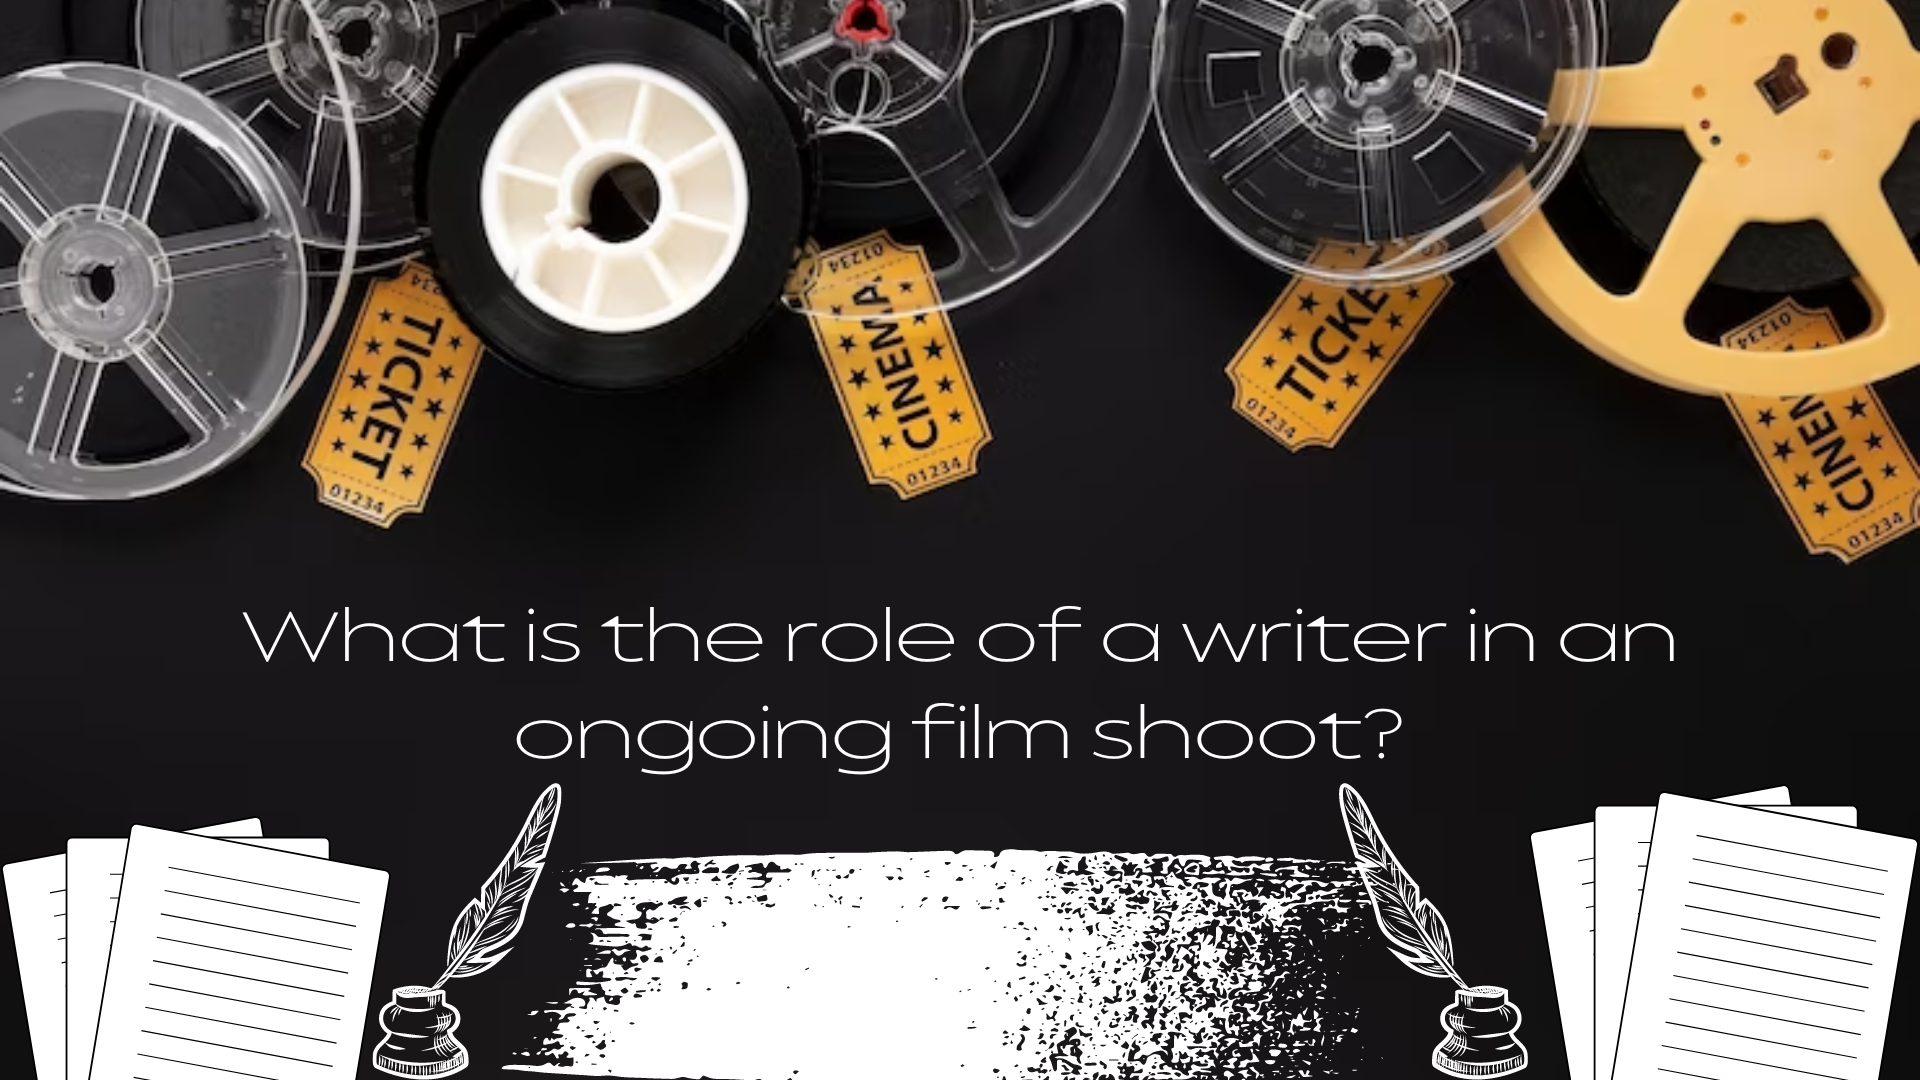 What is the role of a writer in an ongoing film shoot?